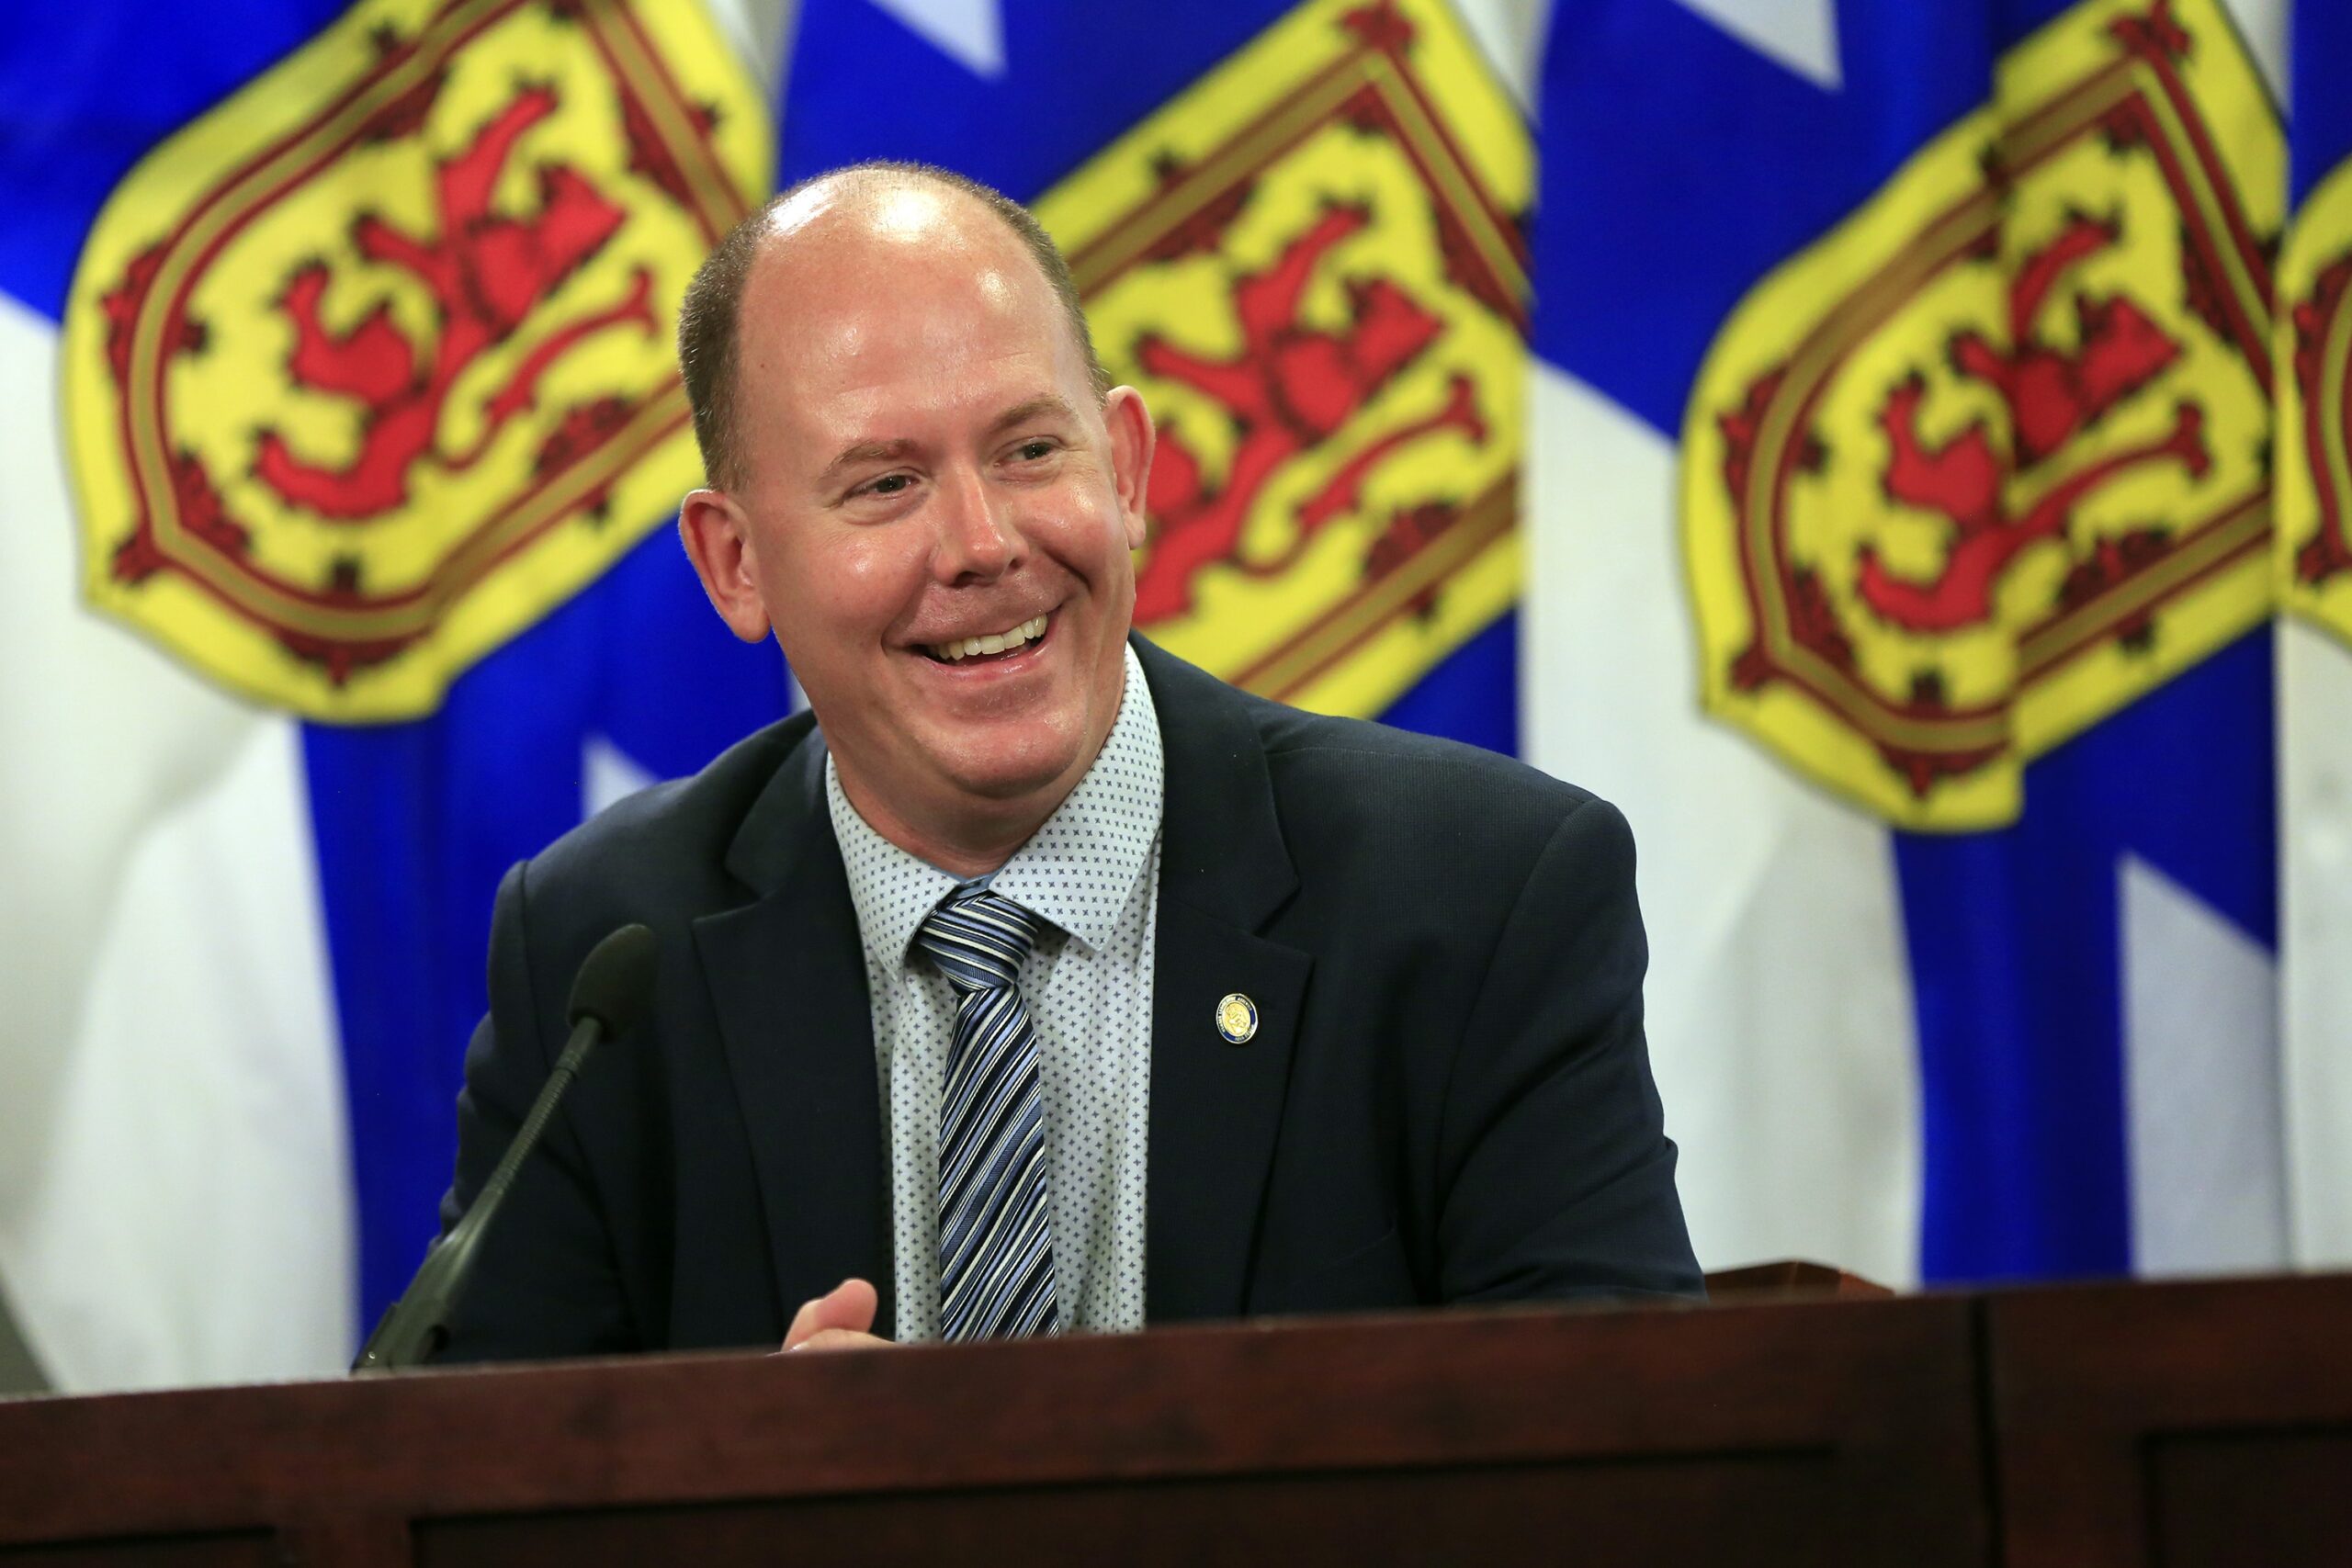 A man wearing a dark suit with a polka dot shirt and striped tie laughs at a podium. In the background are three Nova Scotia flags, coloured blue, yellow and red.